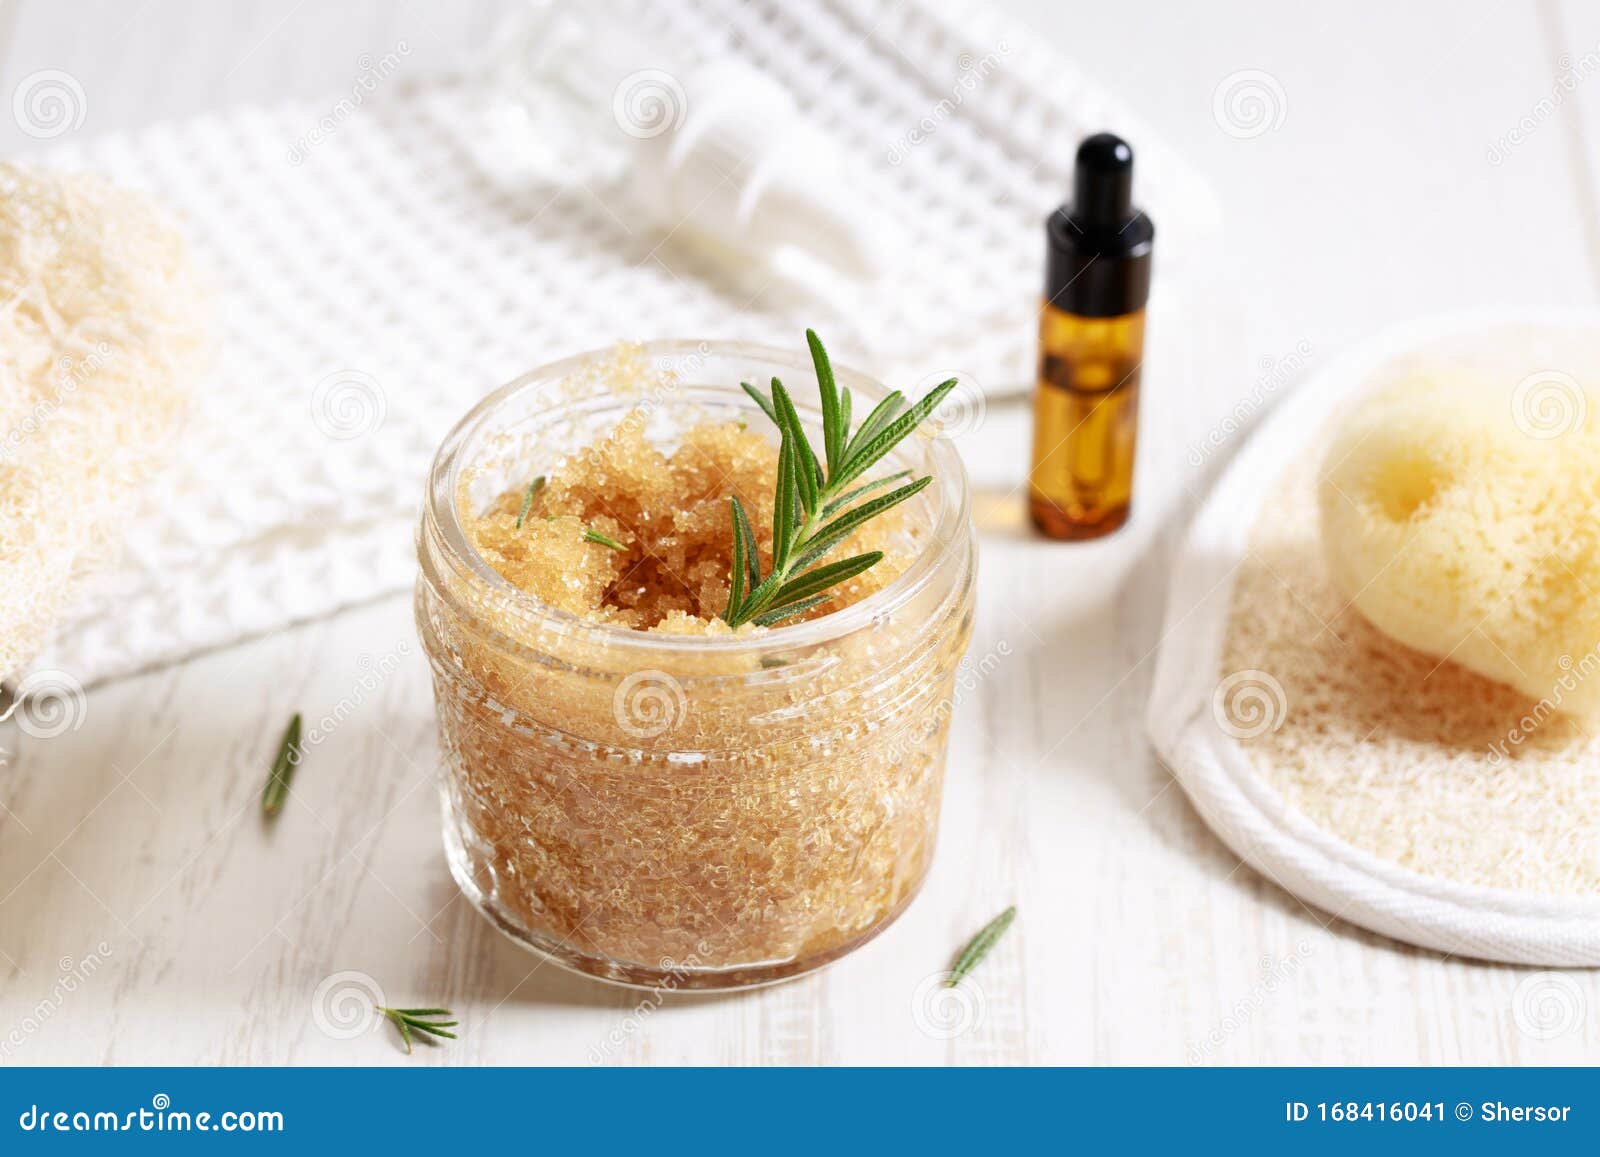 brown sugar scrubs with essential oil and fresh rosemary